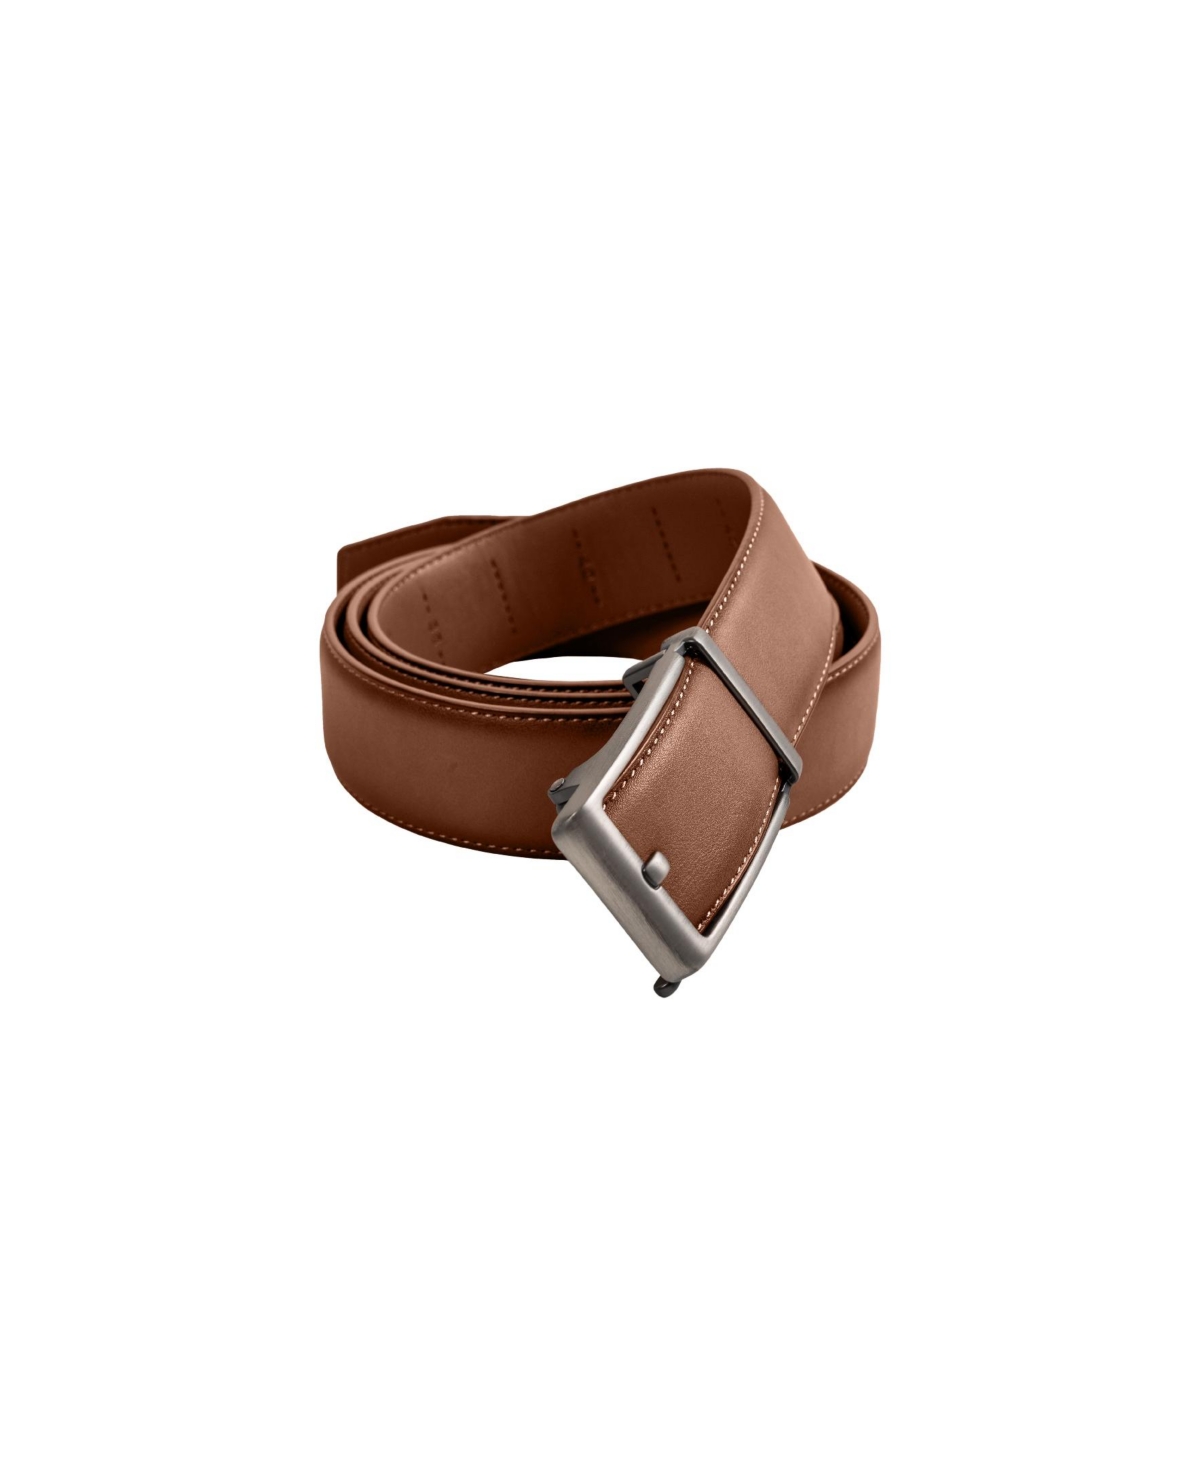 Men's Automatic and Adjustable Belt - Brown